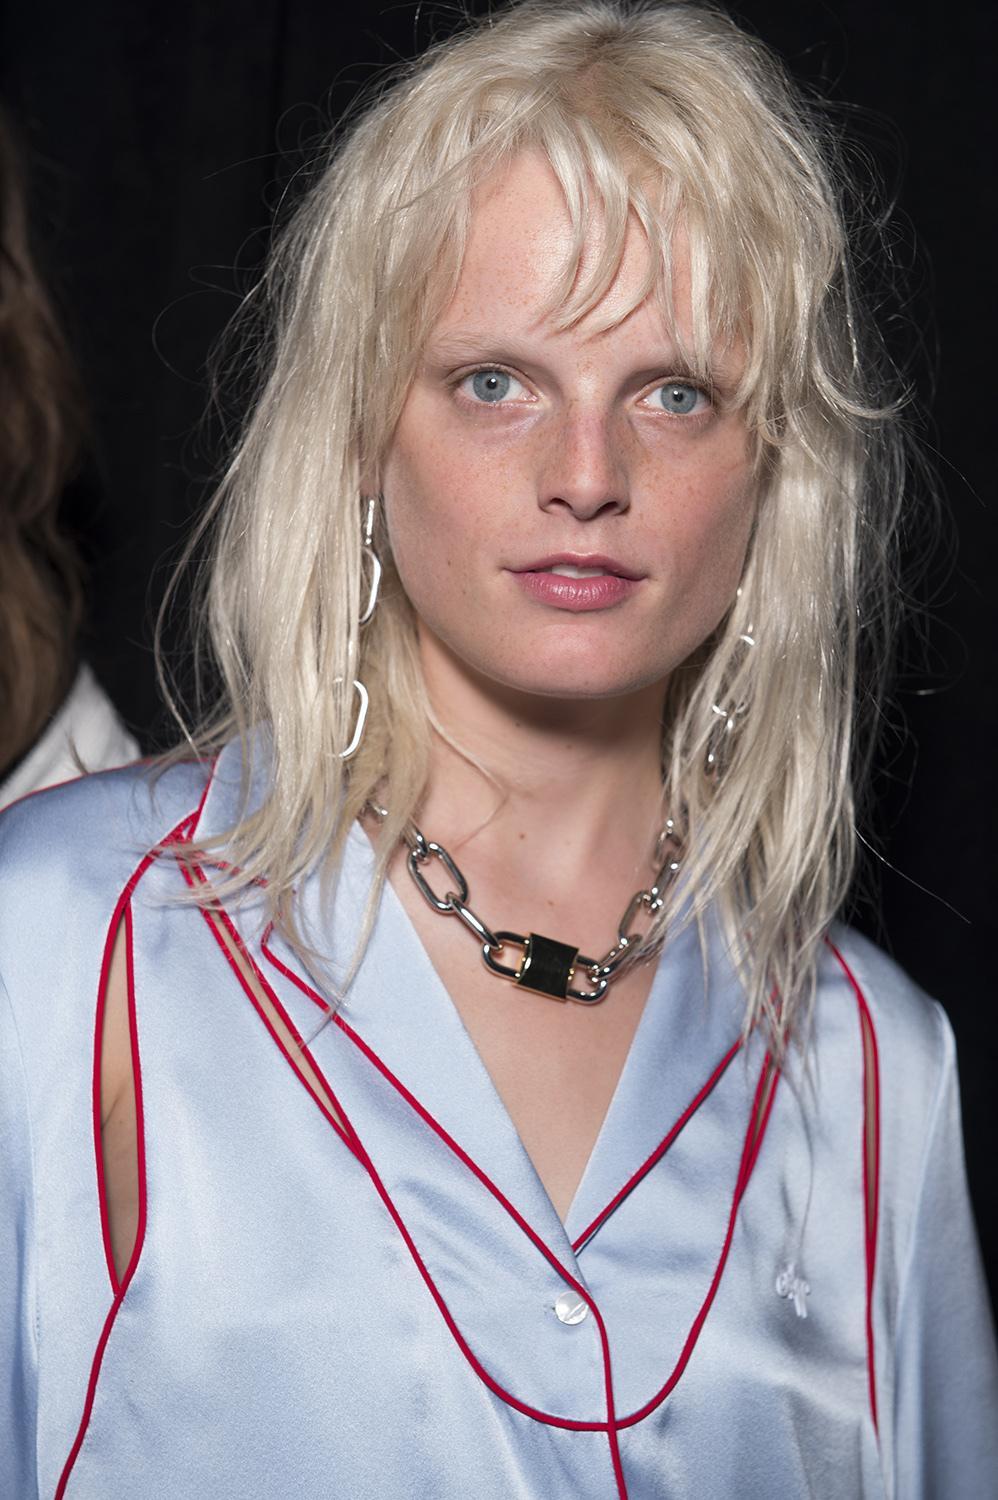 Hanne Gaby Odiele Says Shes Intersex In Powerful Public Statement